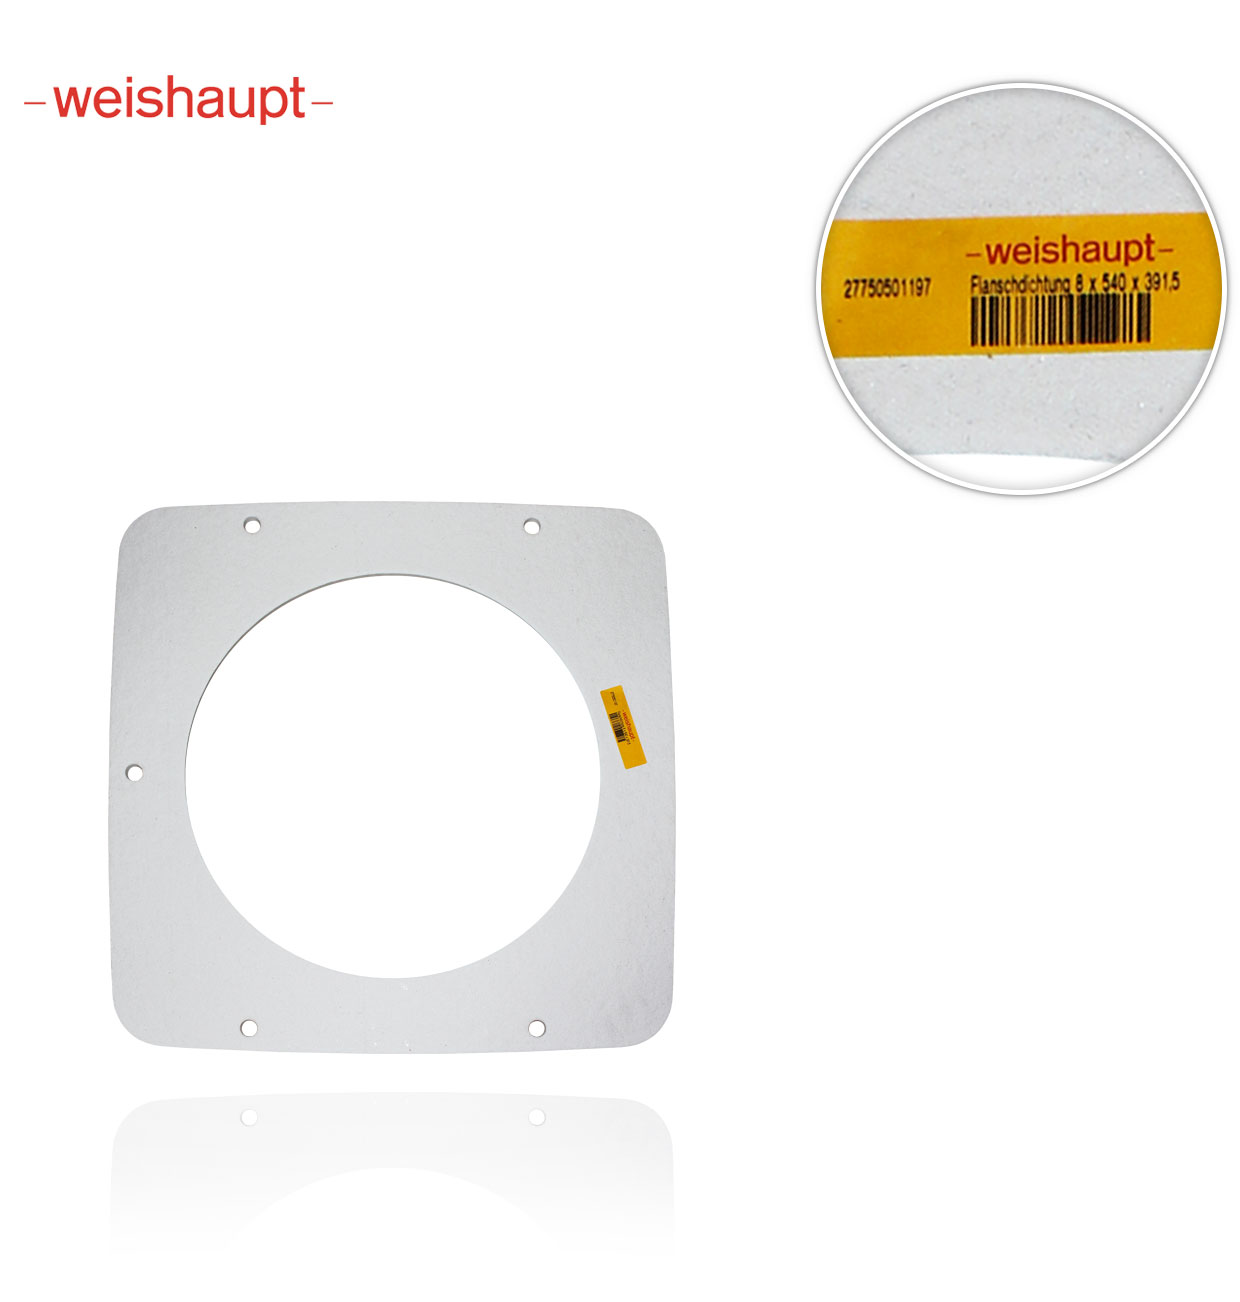 481x570x2 GASKET for WEISHAUPT 27750501077 WK50